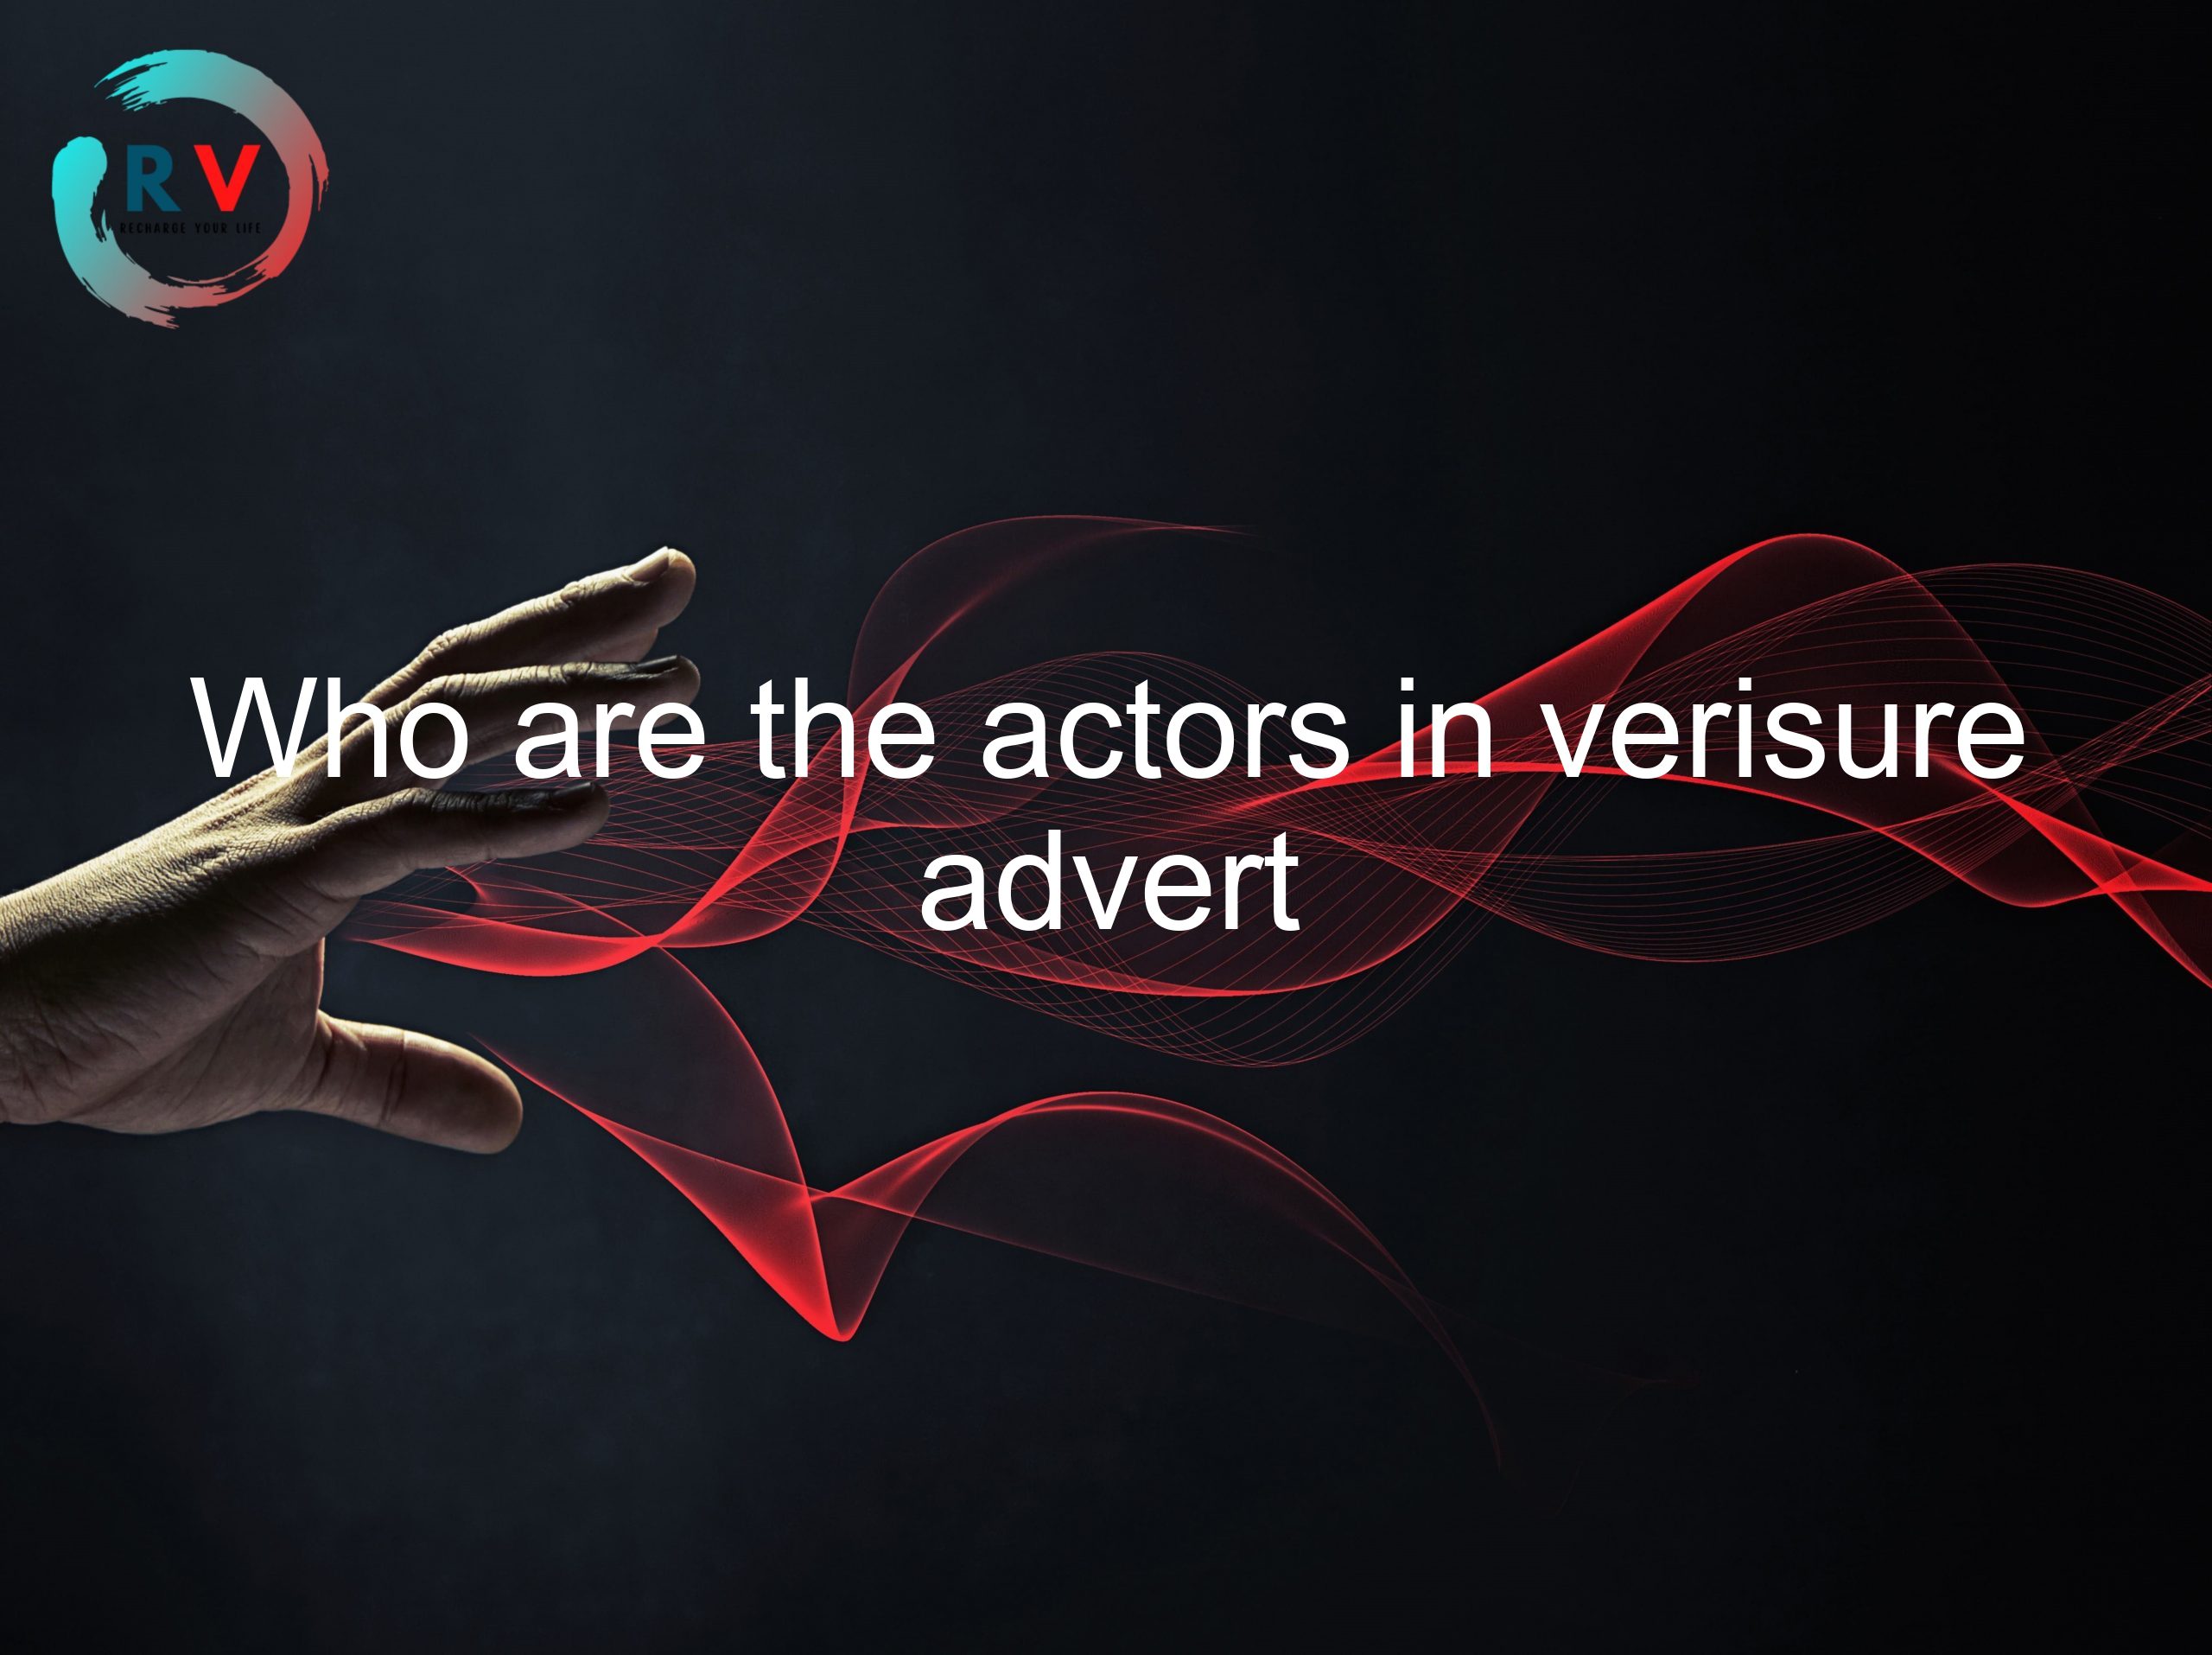 Who are the actors in verisure advert